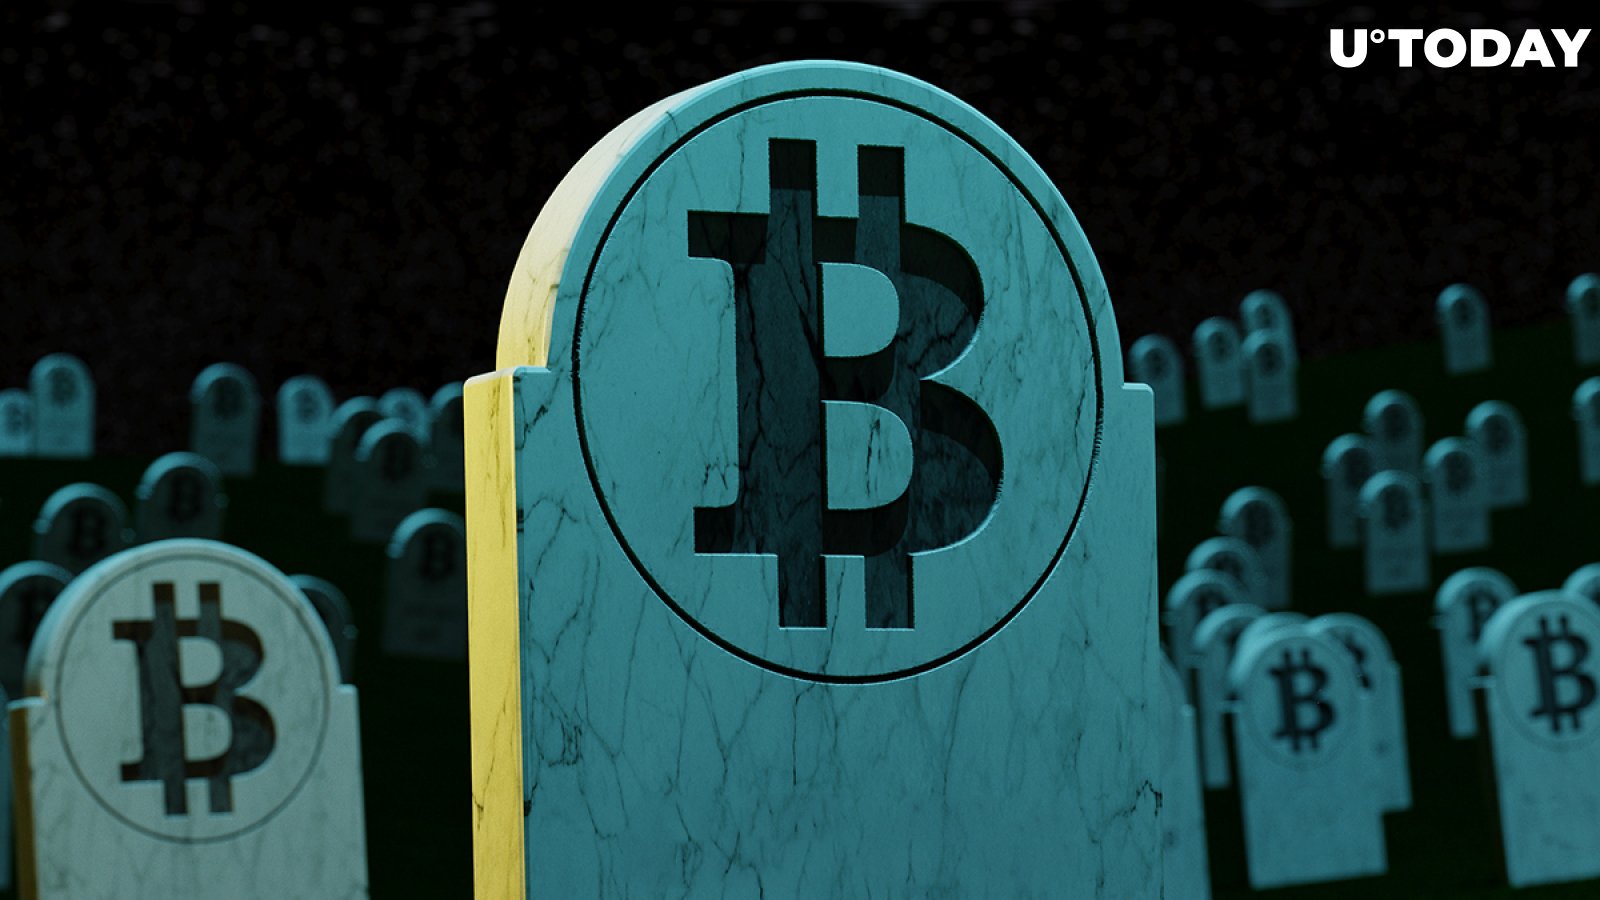 Most Bitcoin Holders Taking Bitcoin to Their Graves If Its Price Doesn’t Break Above $10,000